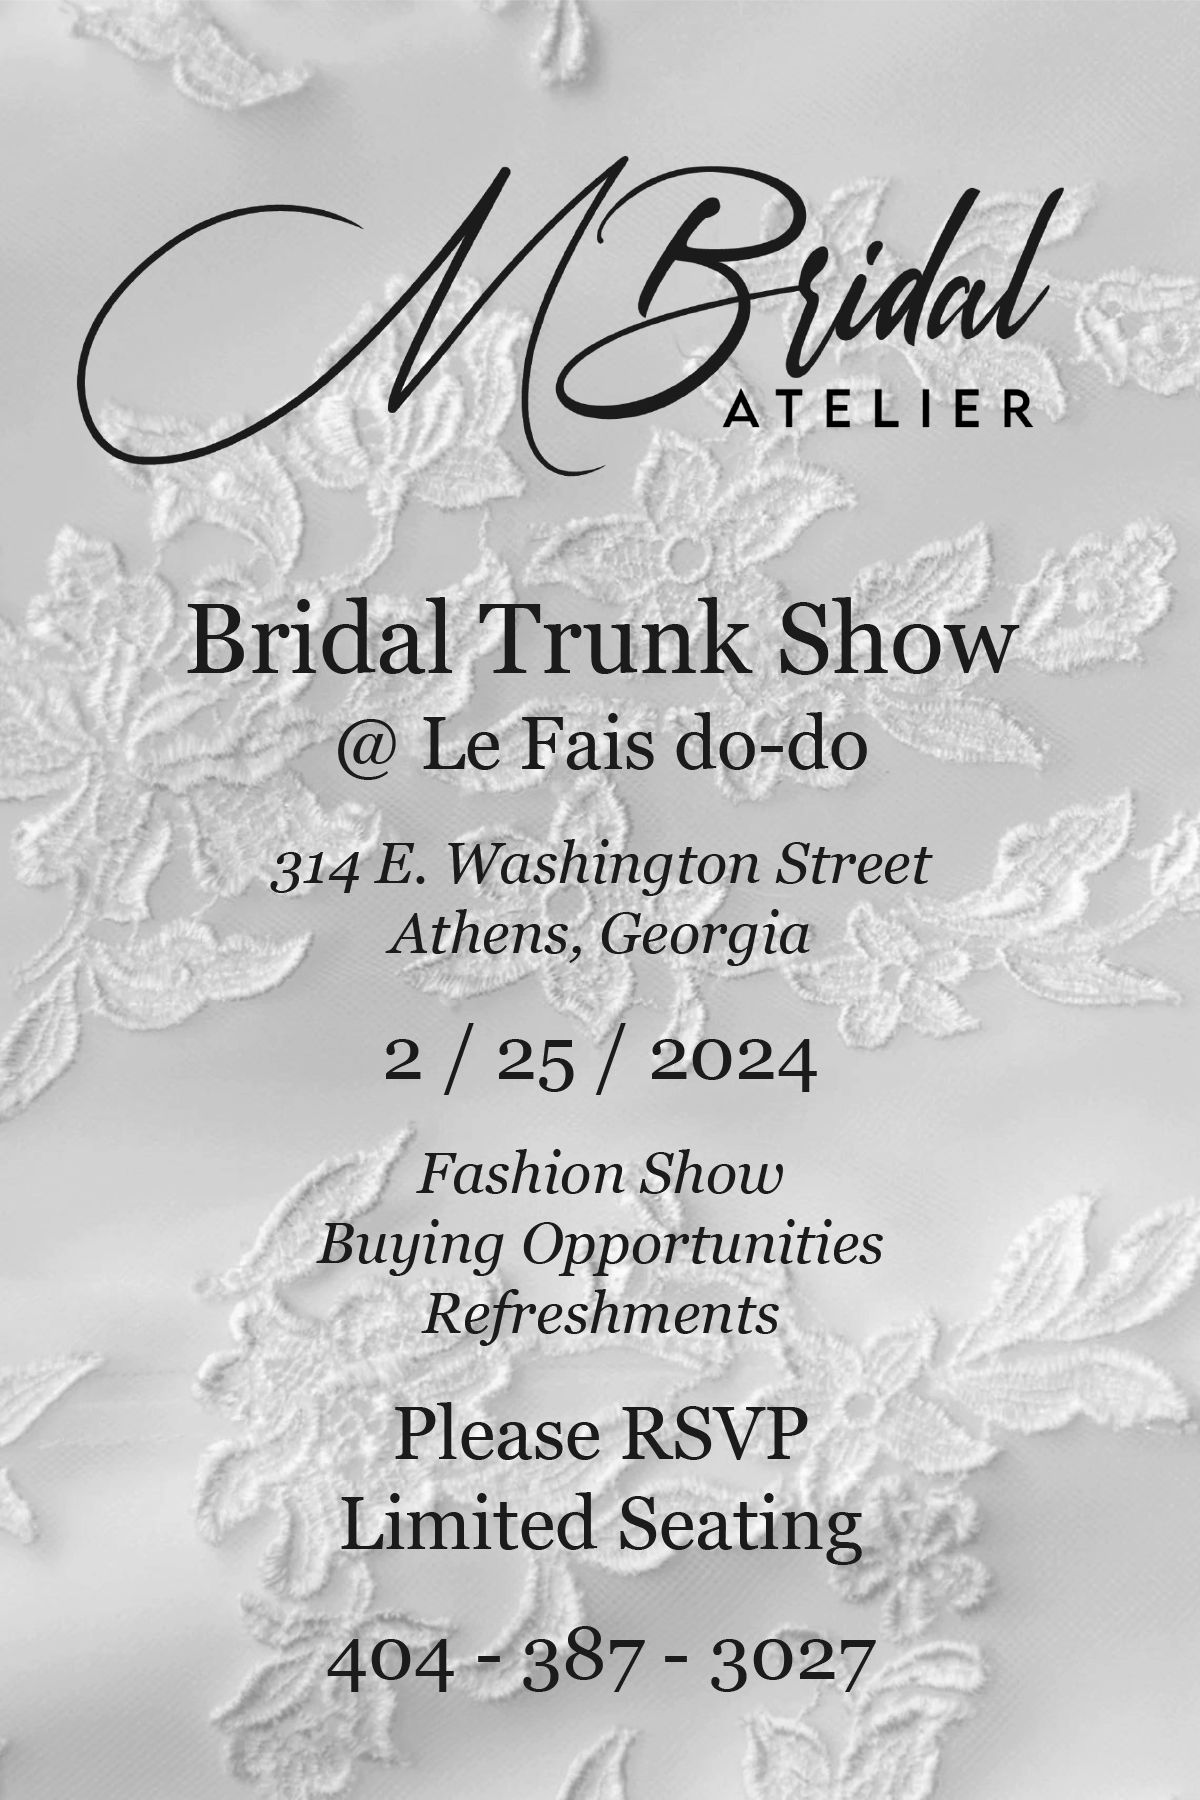 Image for post: M Bridal Atelier Bridal Trunk Show